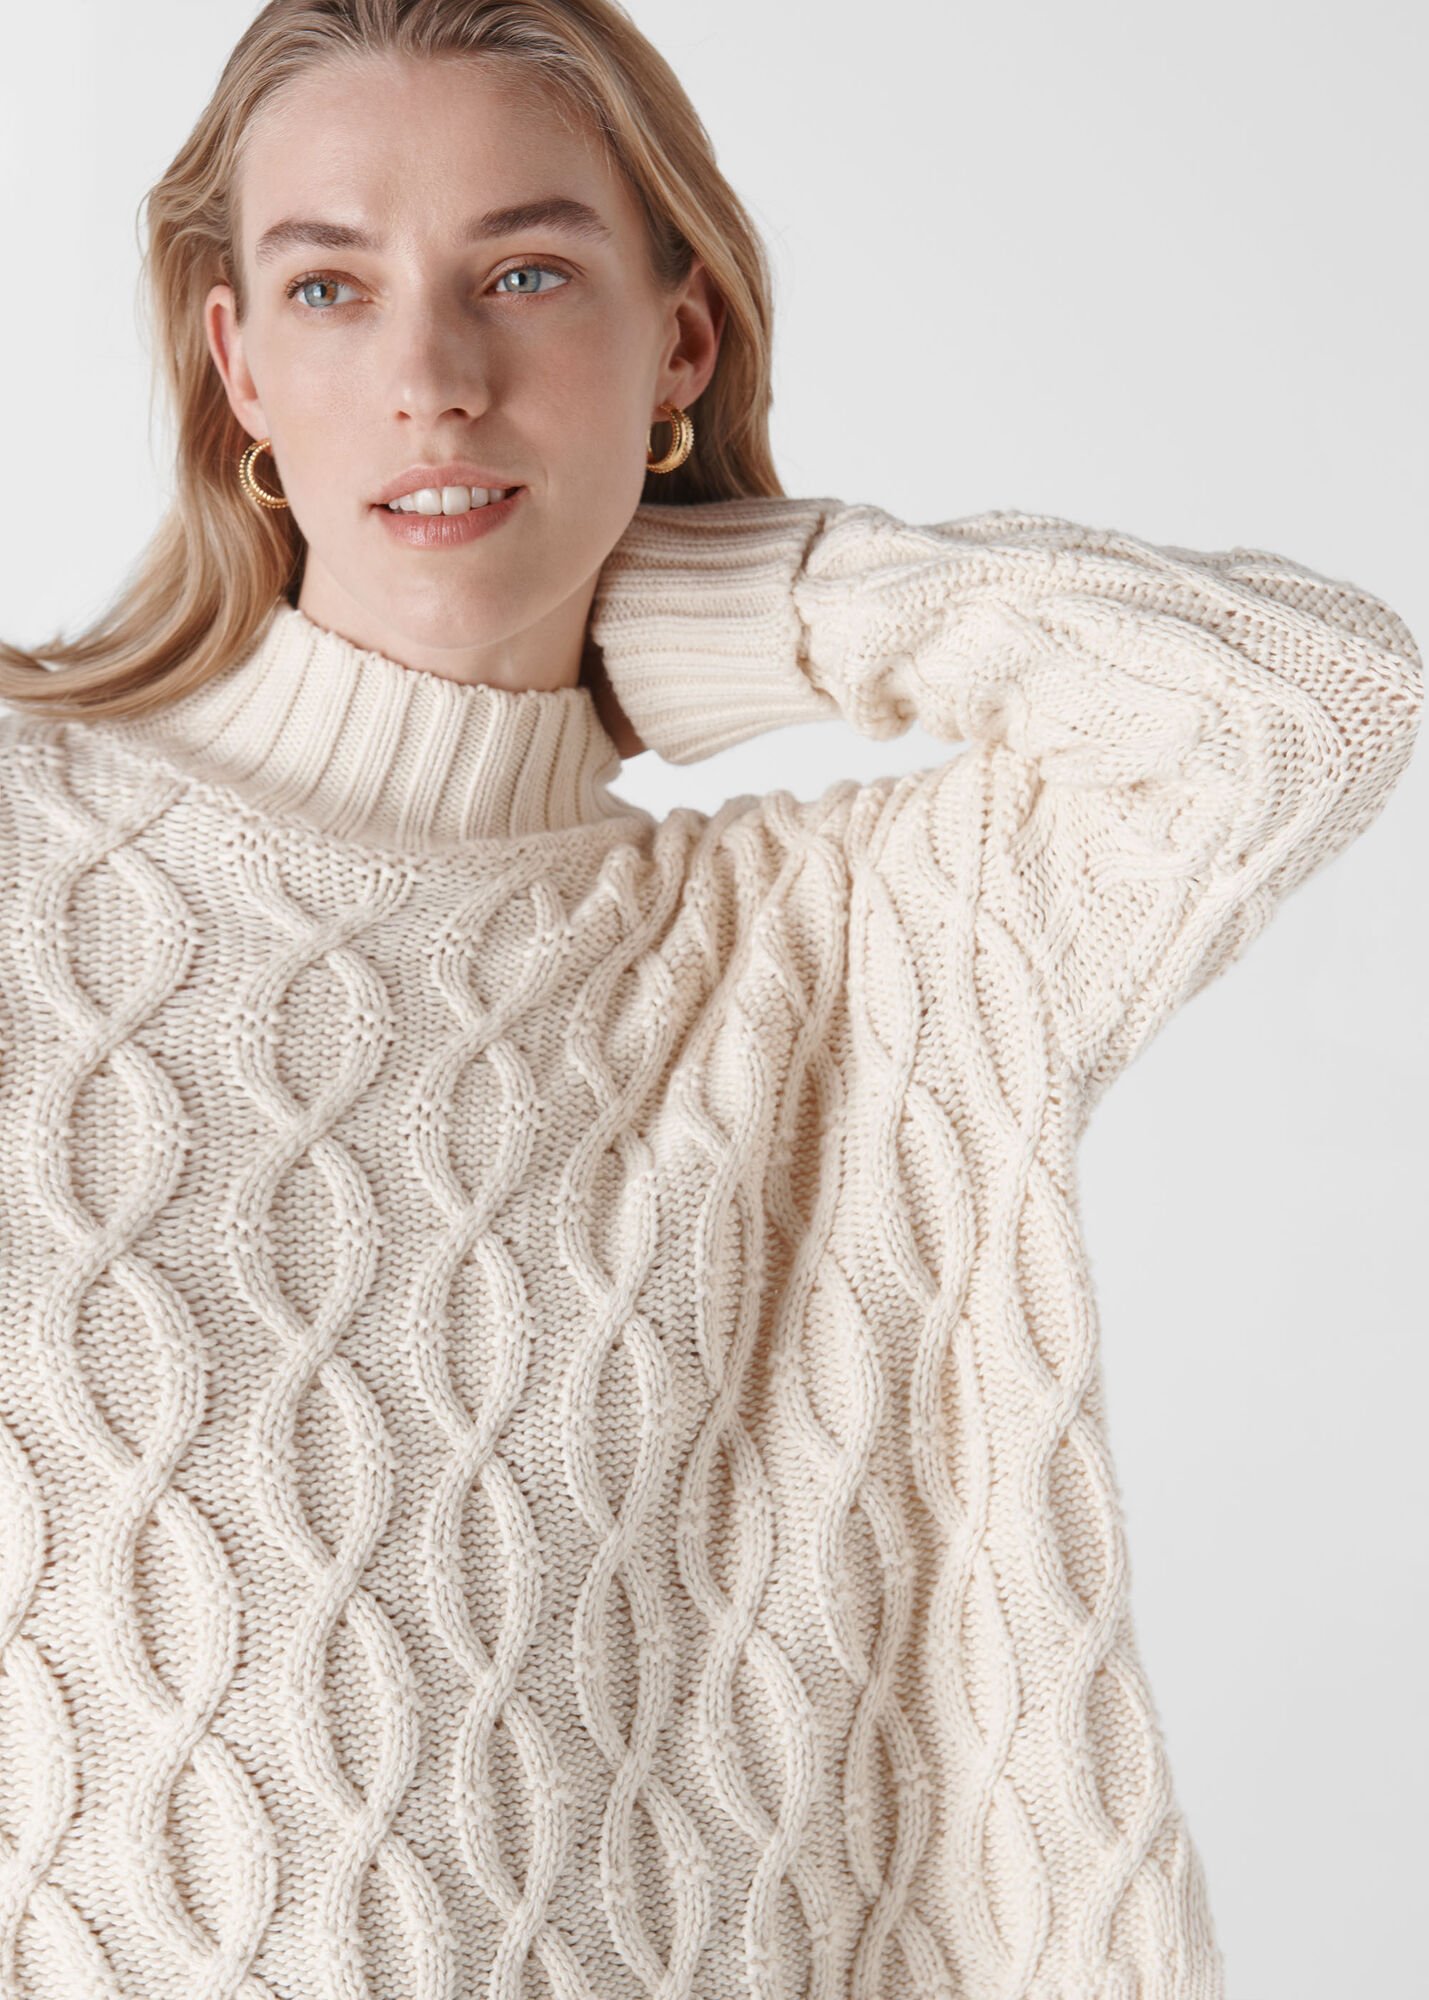 Ivory/Multi Oversized Cable Knit Sweater | WHISTLES